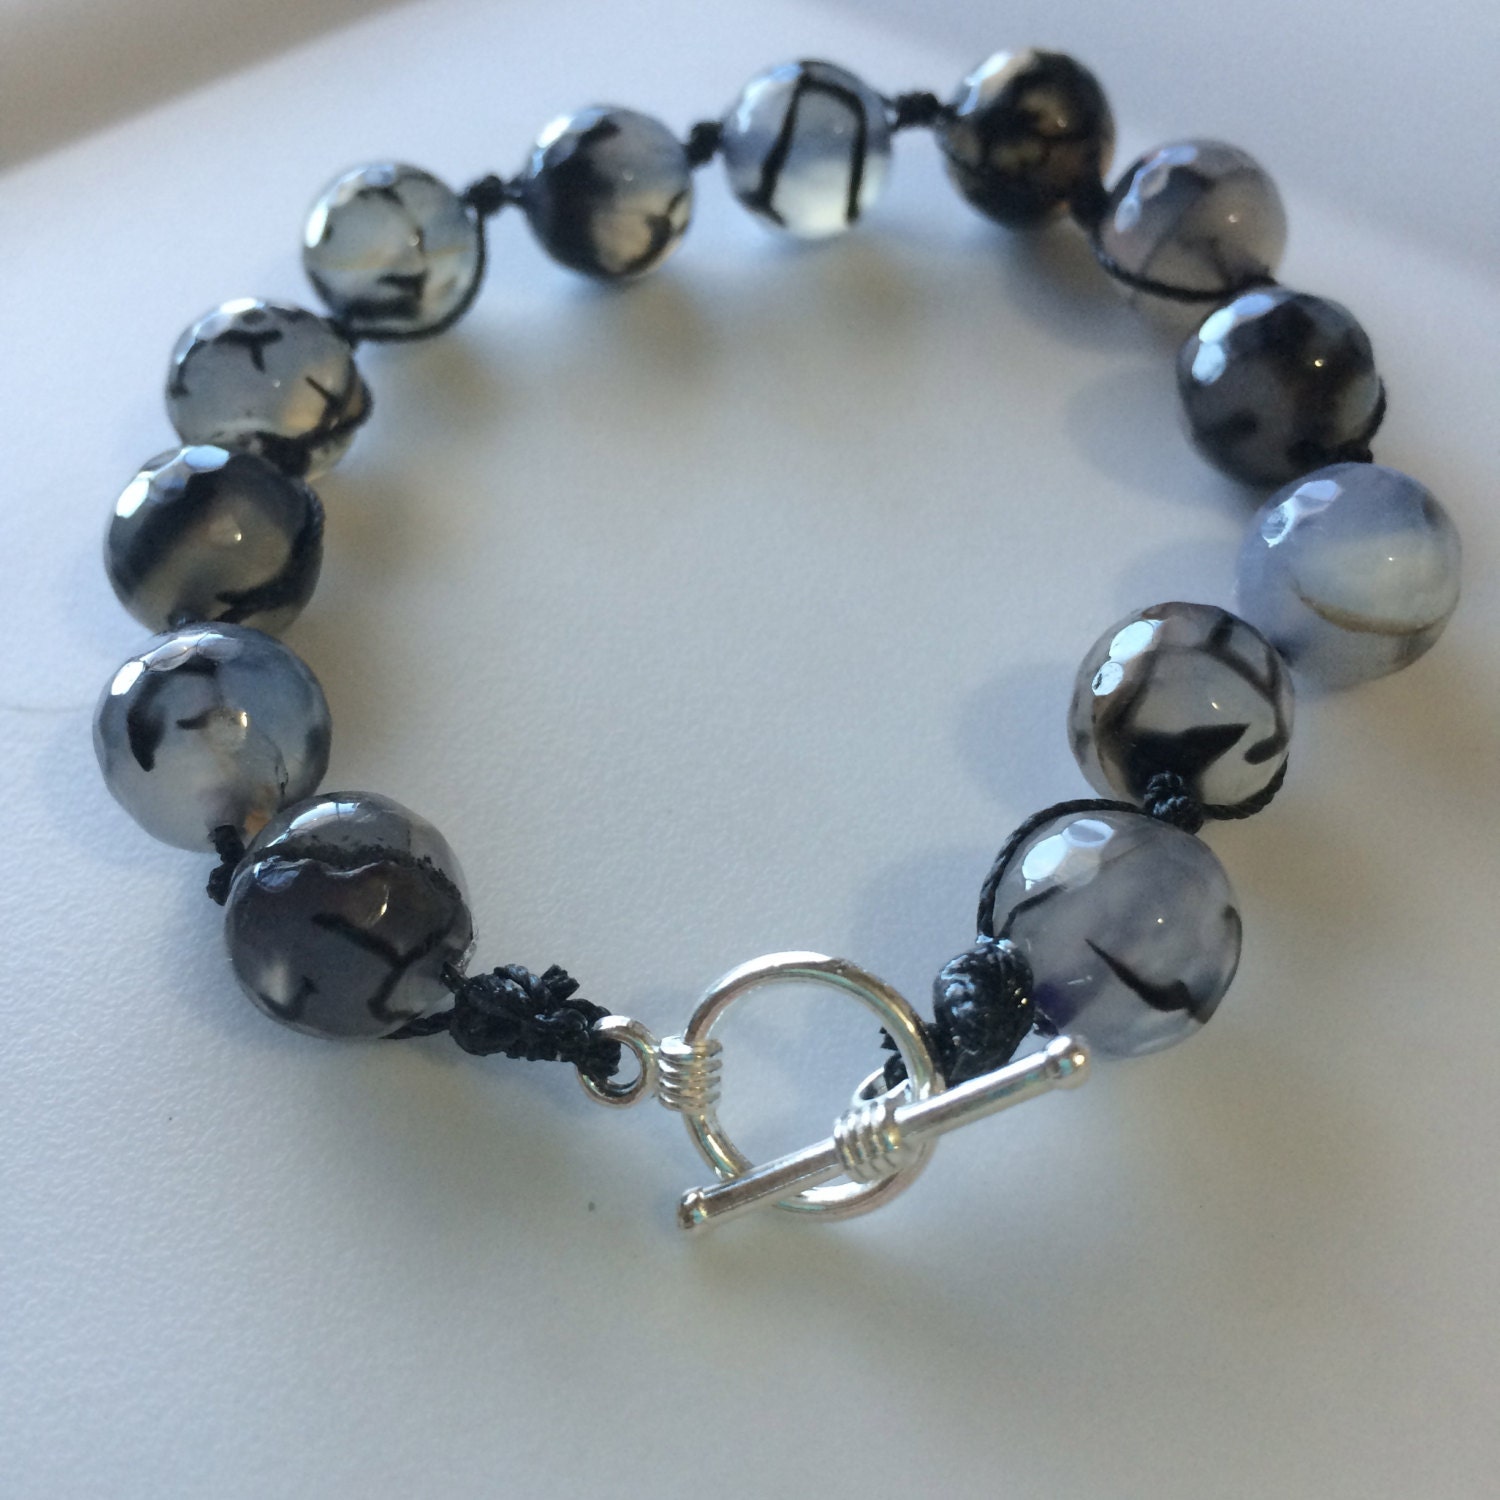 Black and White Quartz Besotted Bracelet by SomedaySophieShop